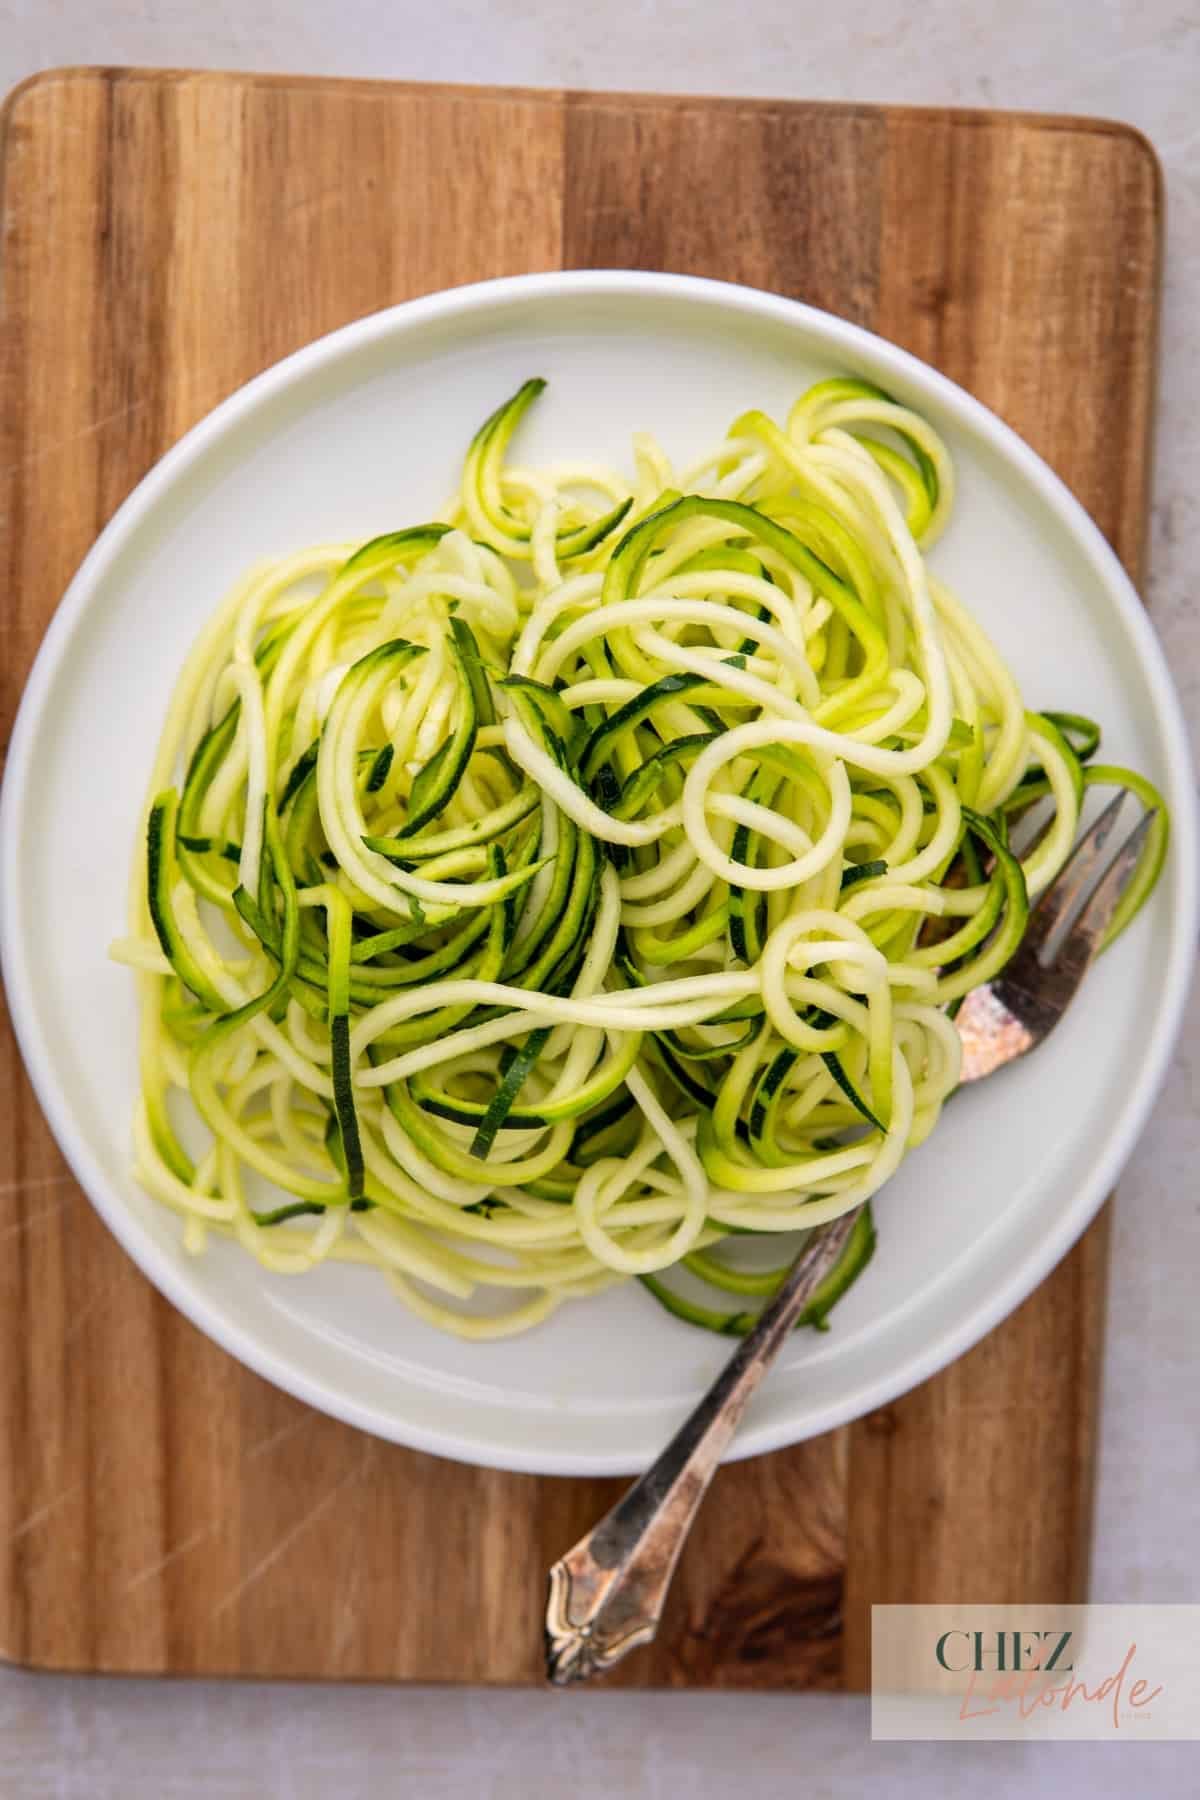 Zucchini noodles - Zoodles on a white round plate with a fork.  